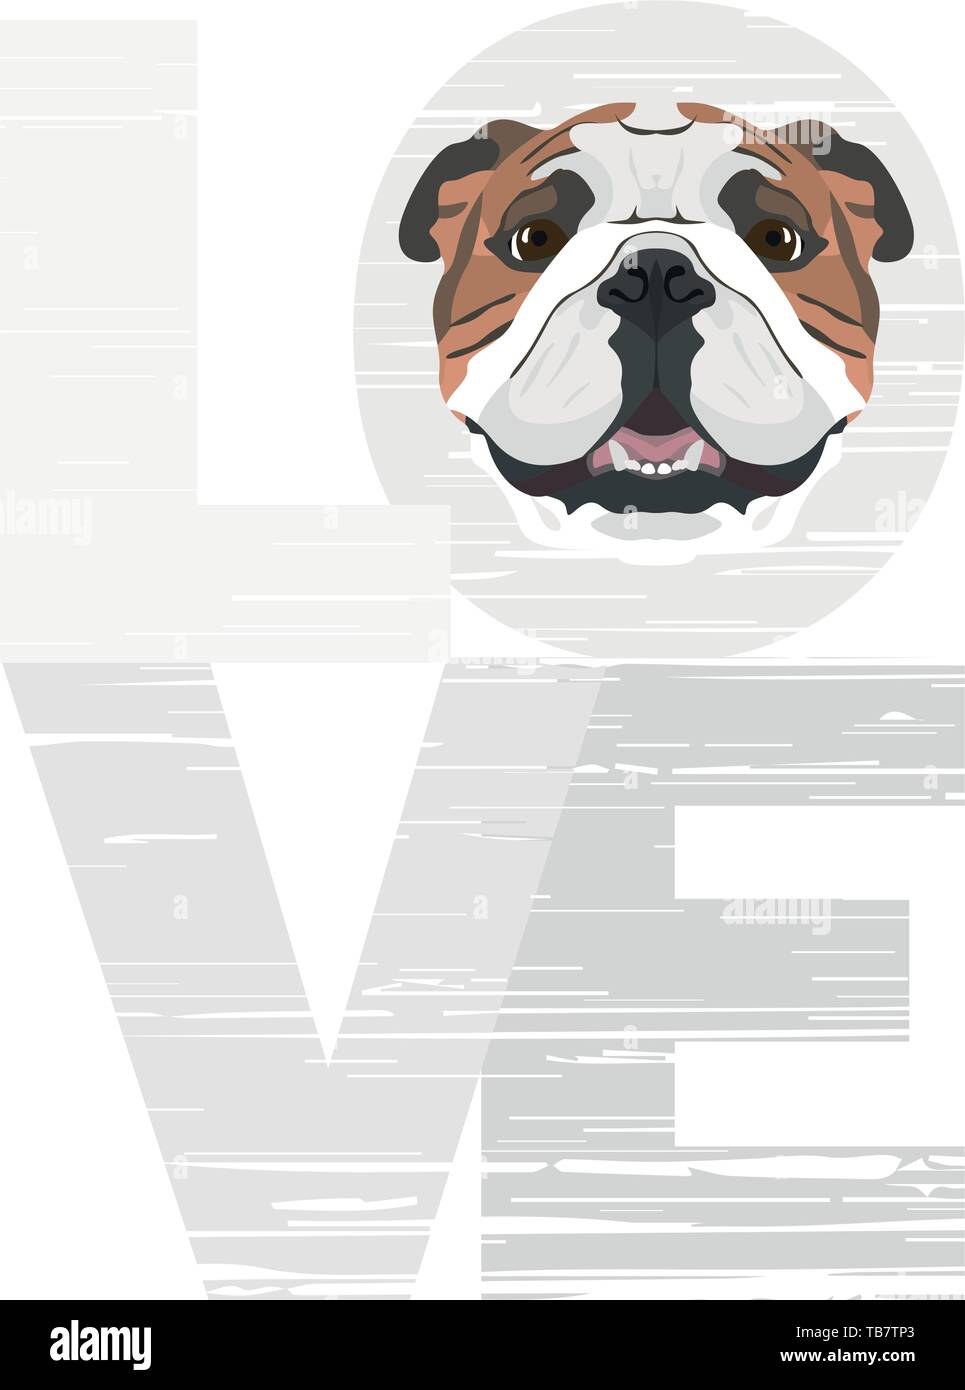 Love English Bulldog - A dog's head with the word love. The dog is man's best friend and is loved as a pet. Stock Vector